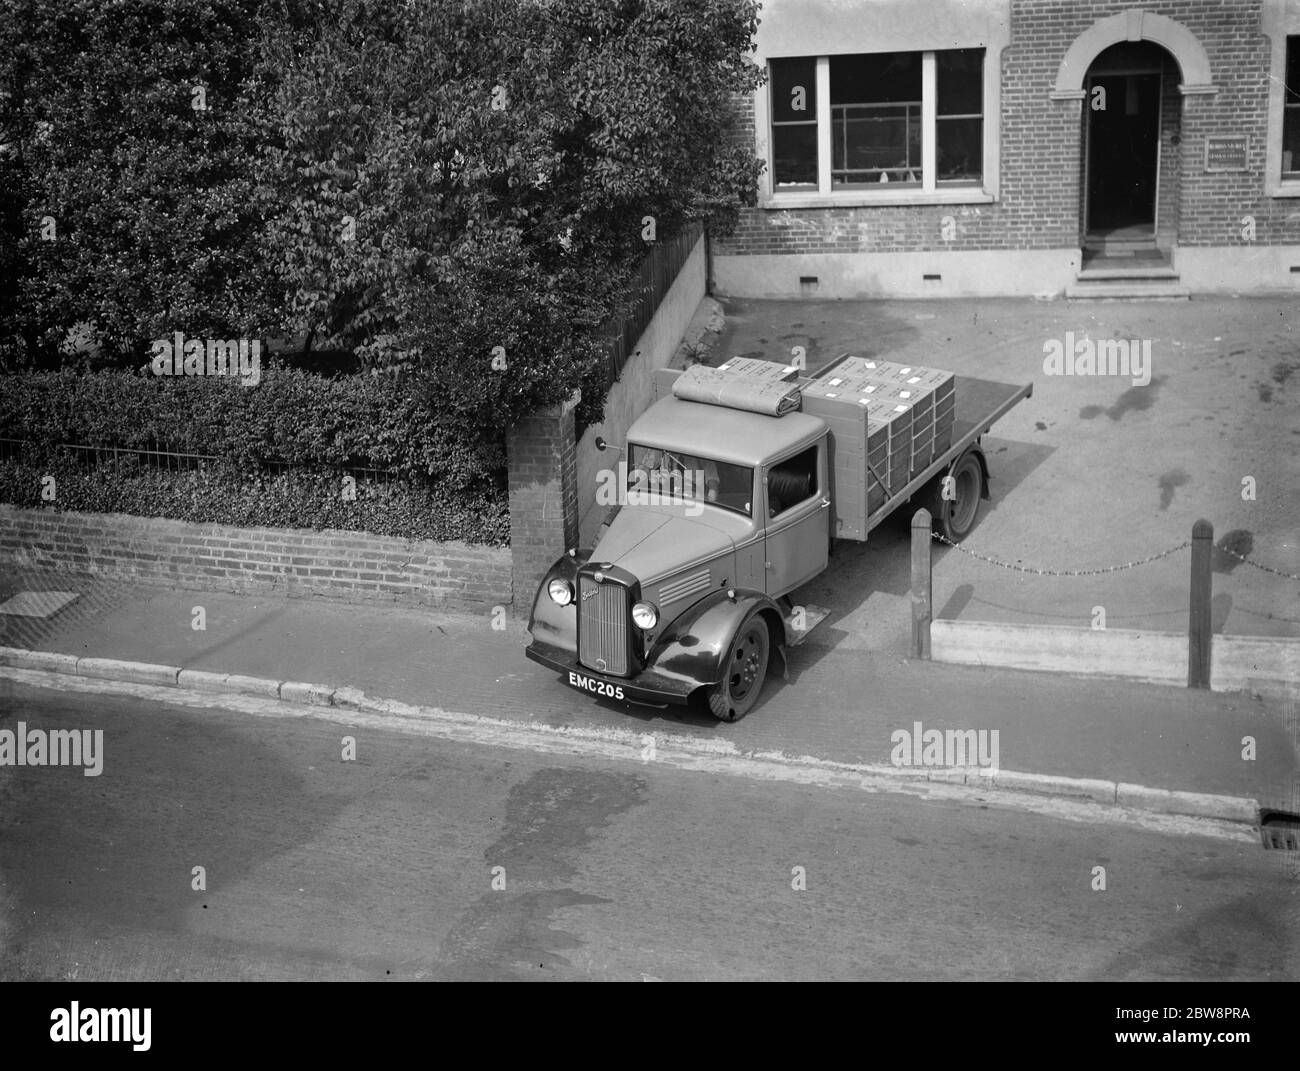 1930s Truck High Resolution Stock Photography and Images - Alamy